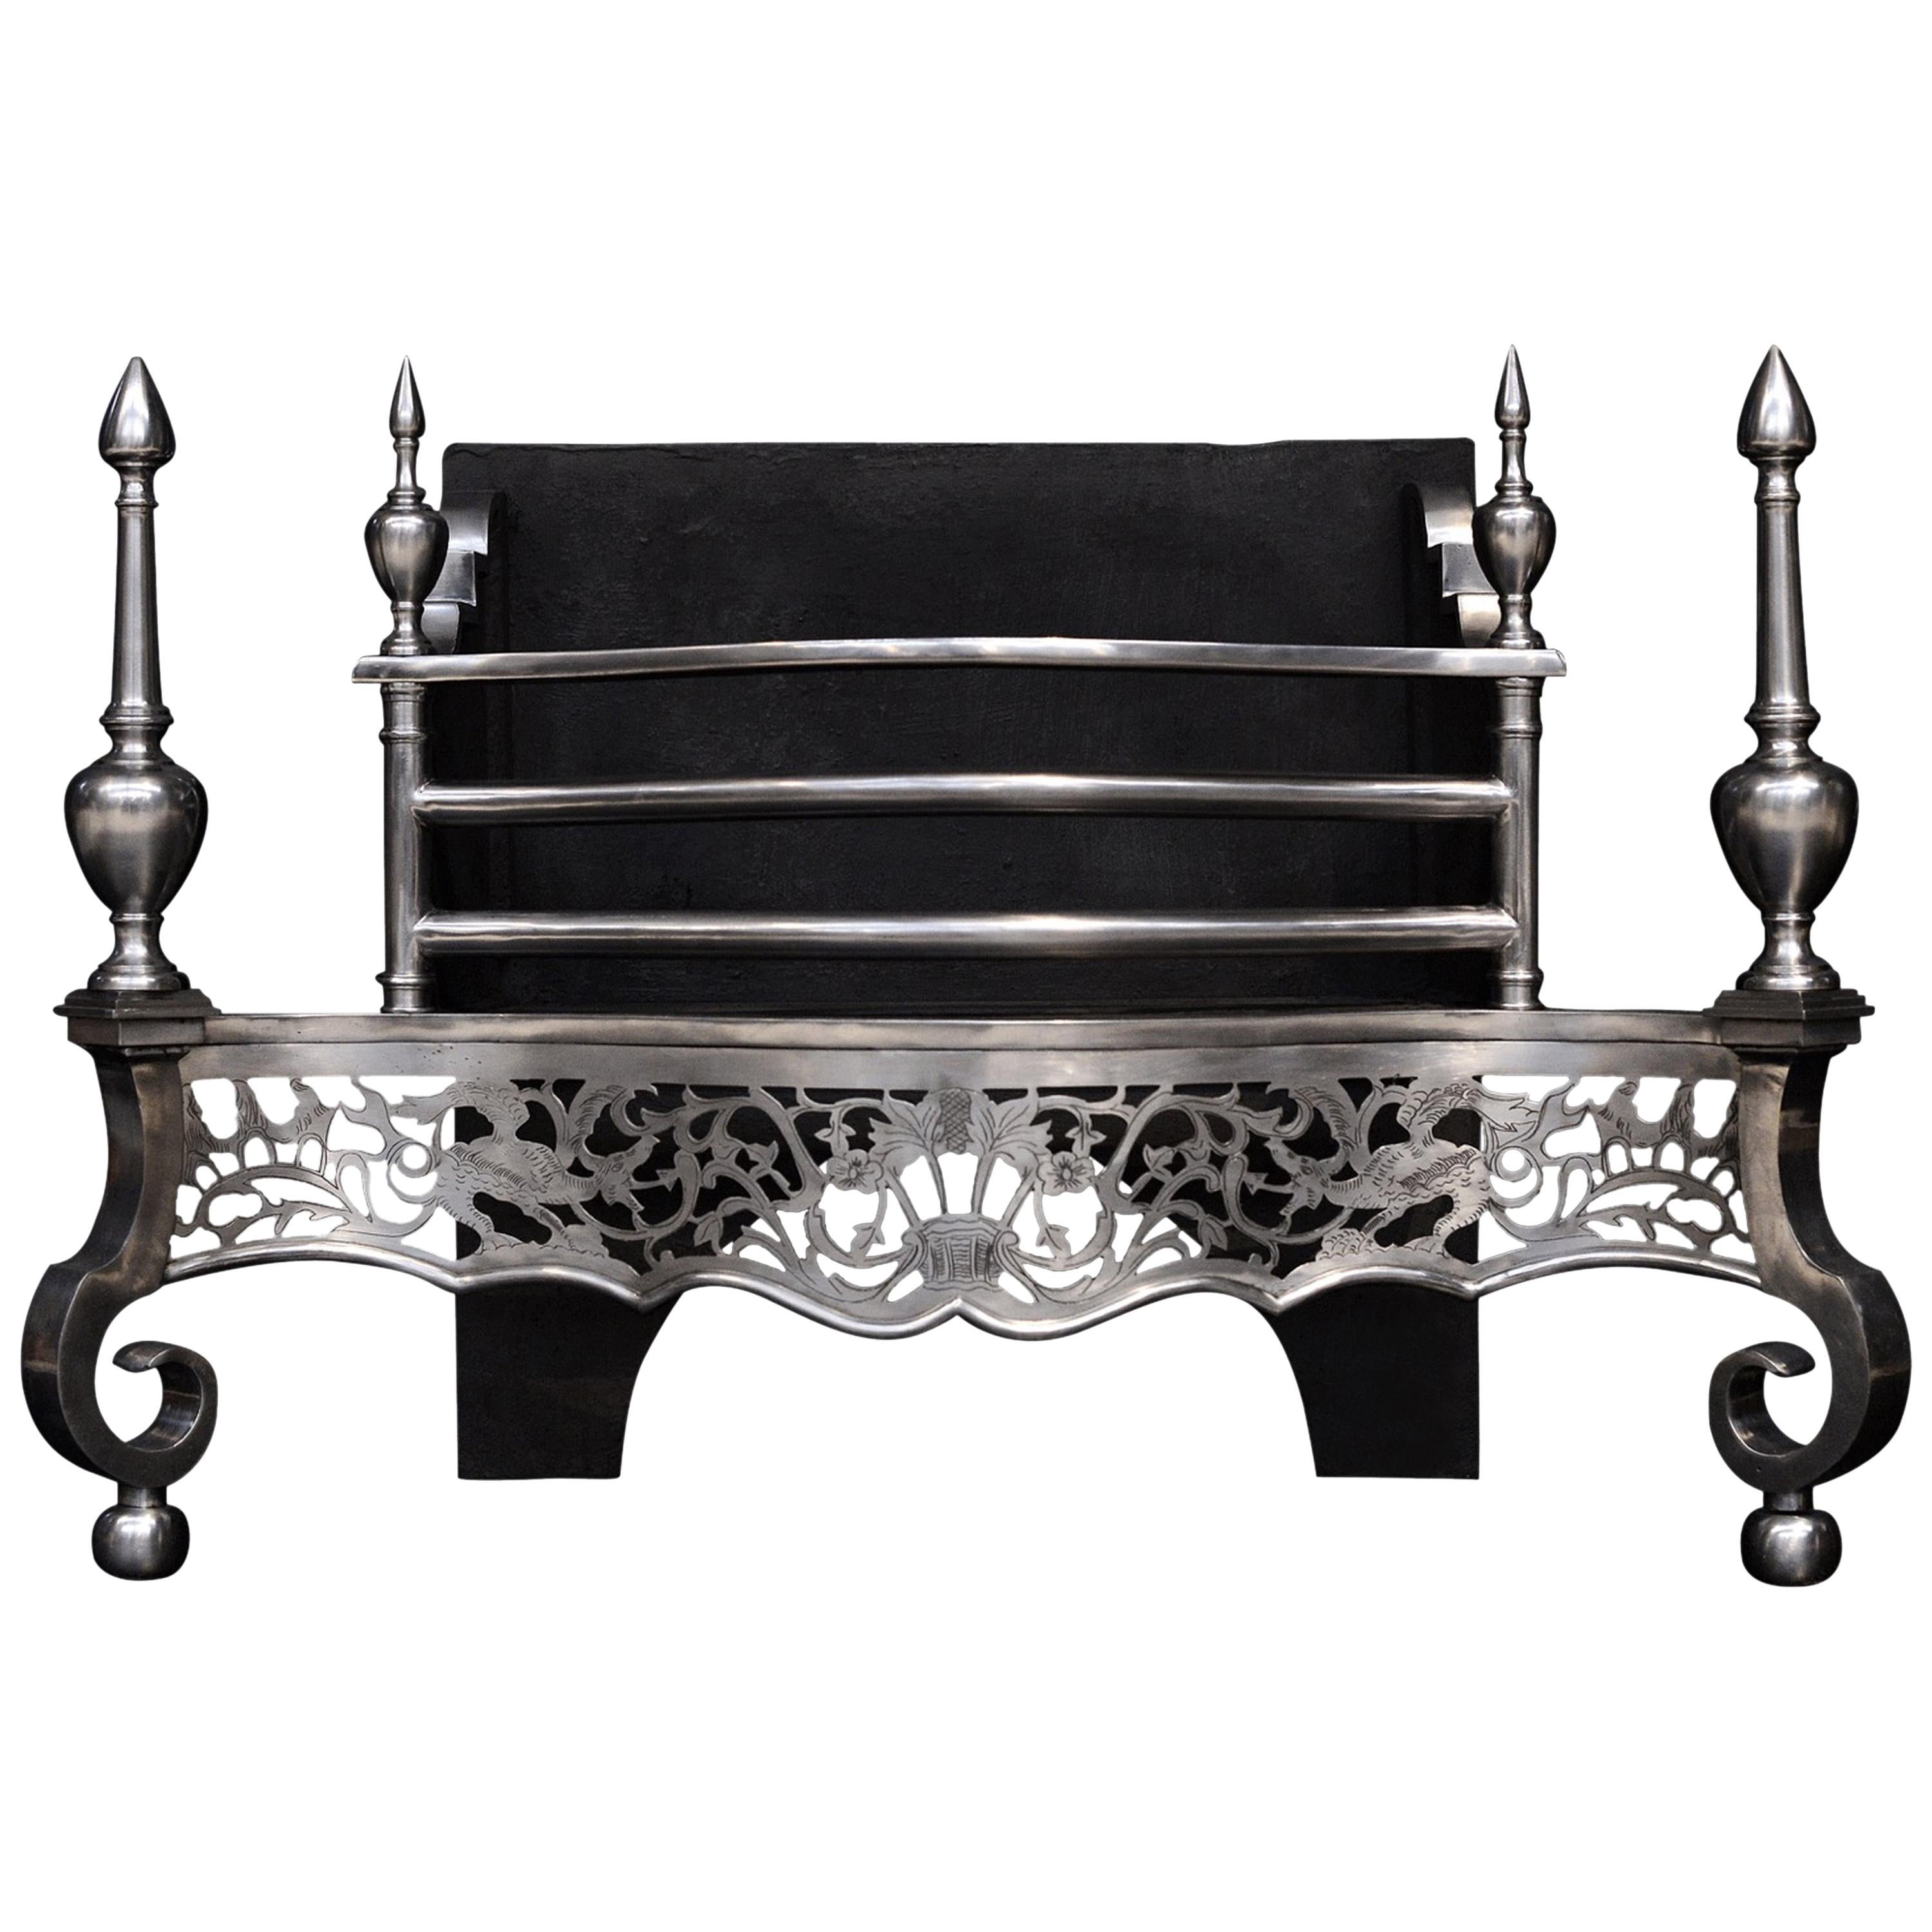 Good Quality Georgian Style English Steel Firegrate For Sale